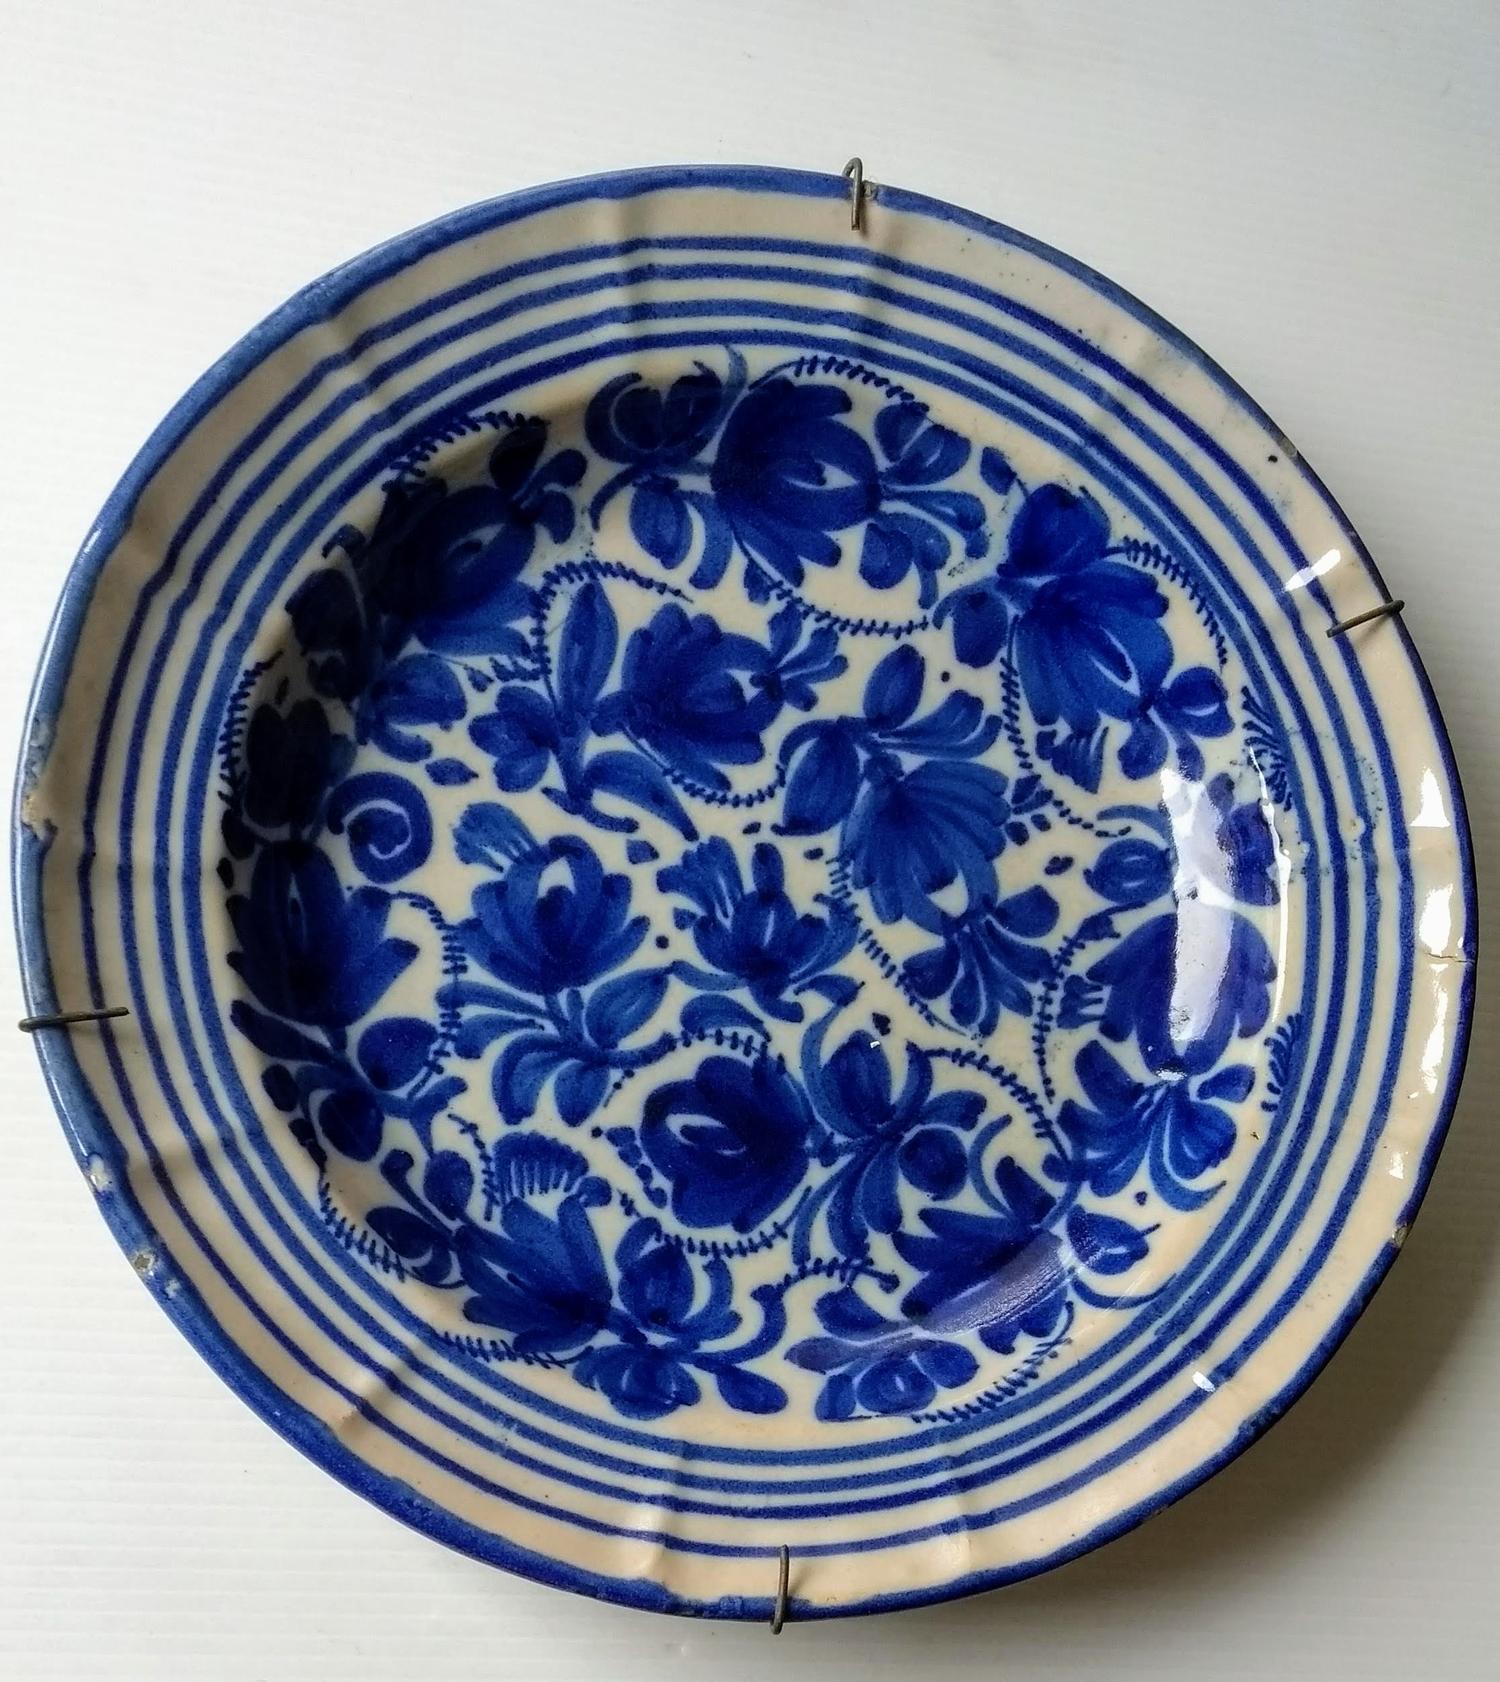 Two 18th century blue and white delft tin plate circular chargers with floral and foliate - Image 2 of 4